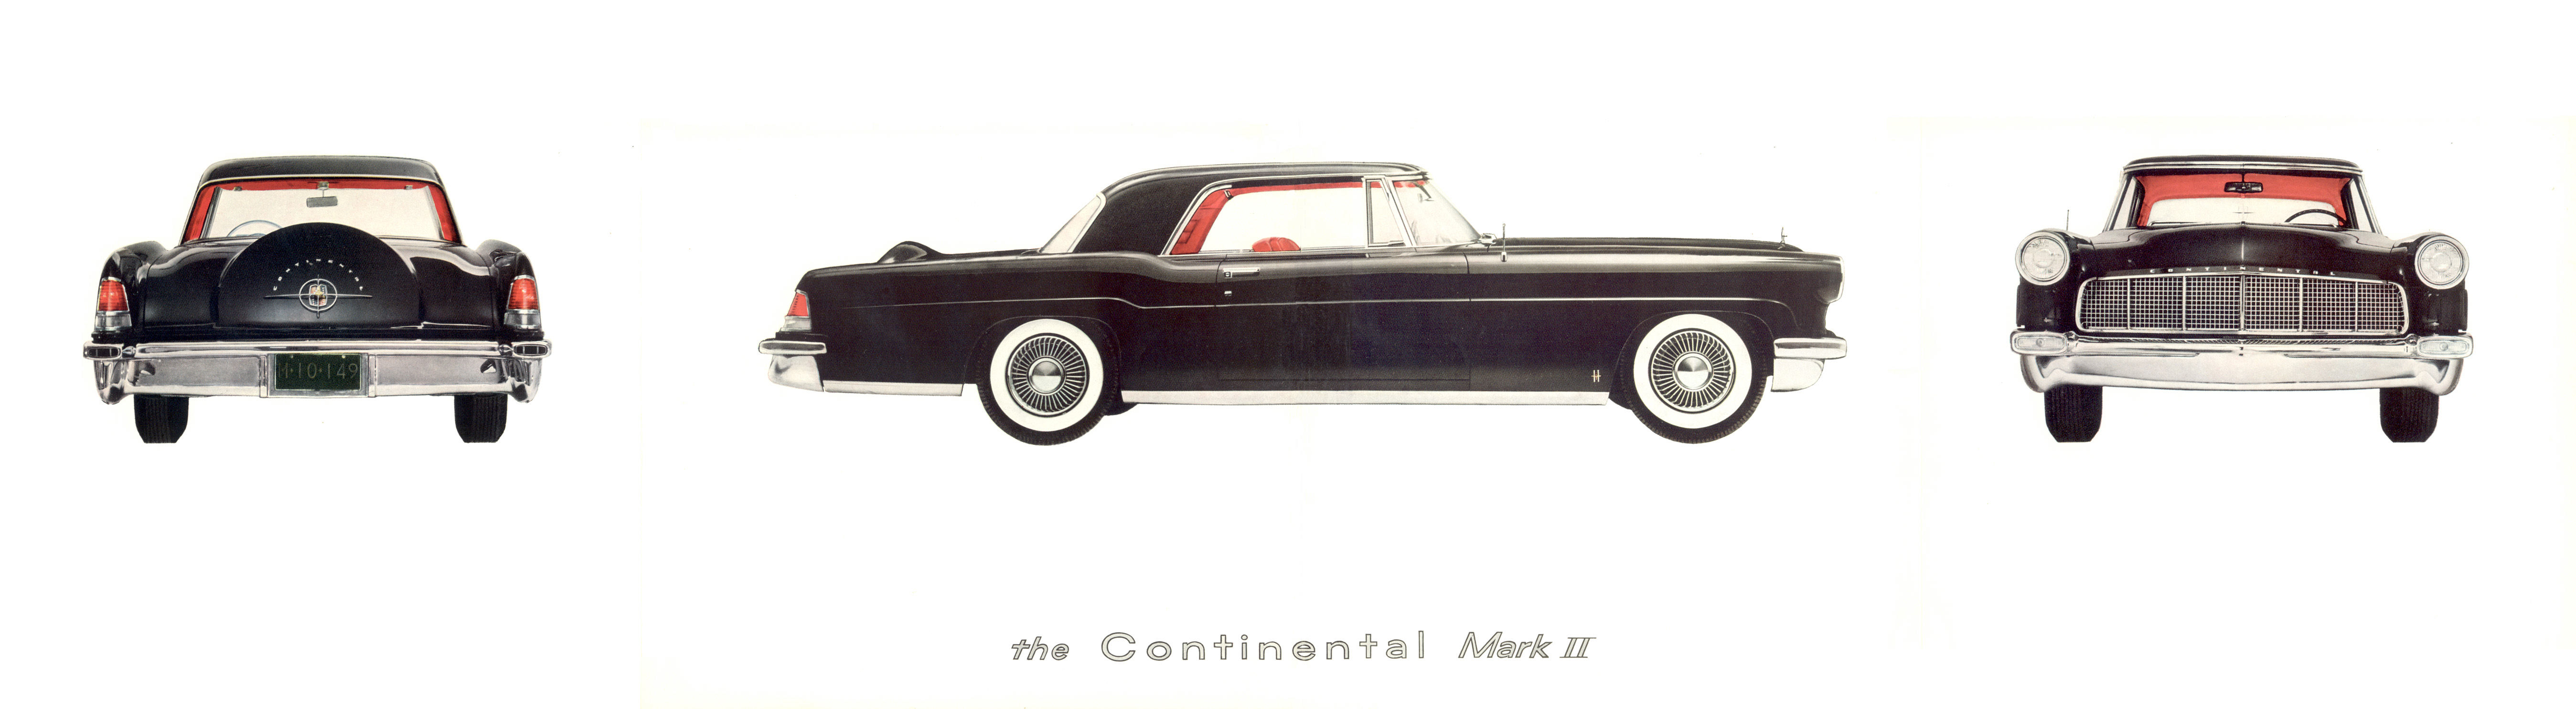 1956 Lincoln Continental Mark II Brochure Page 1